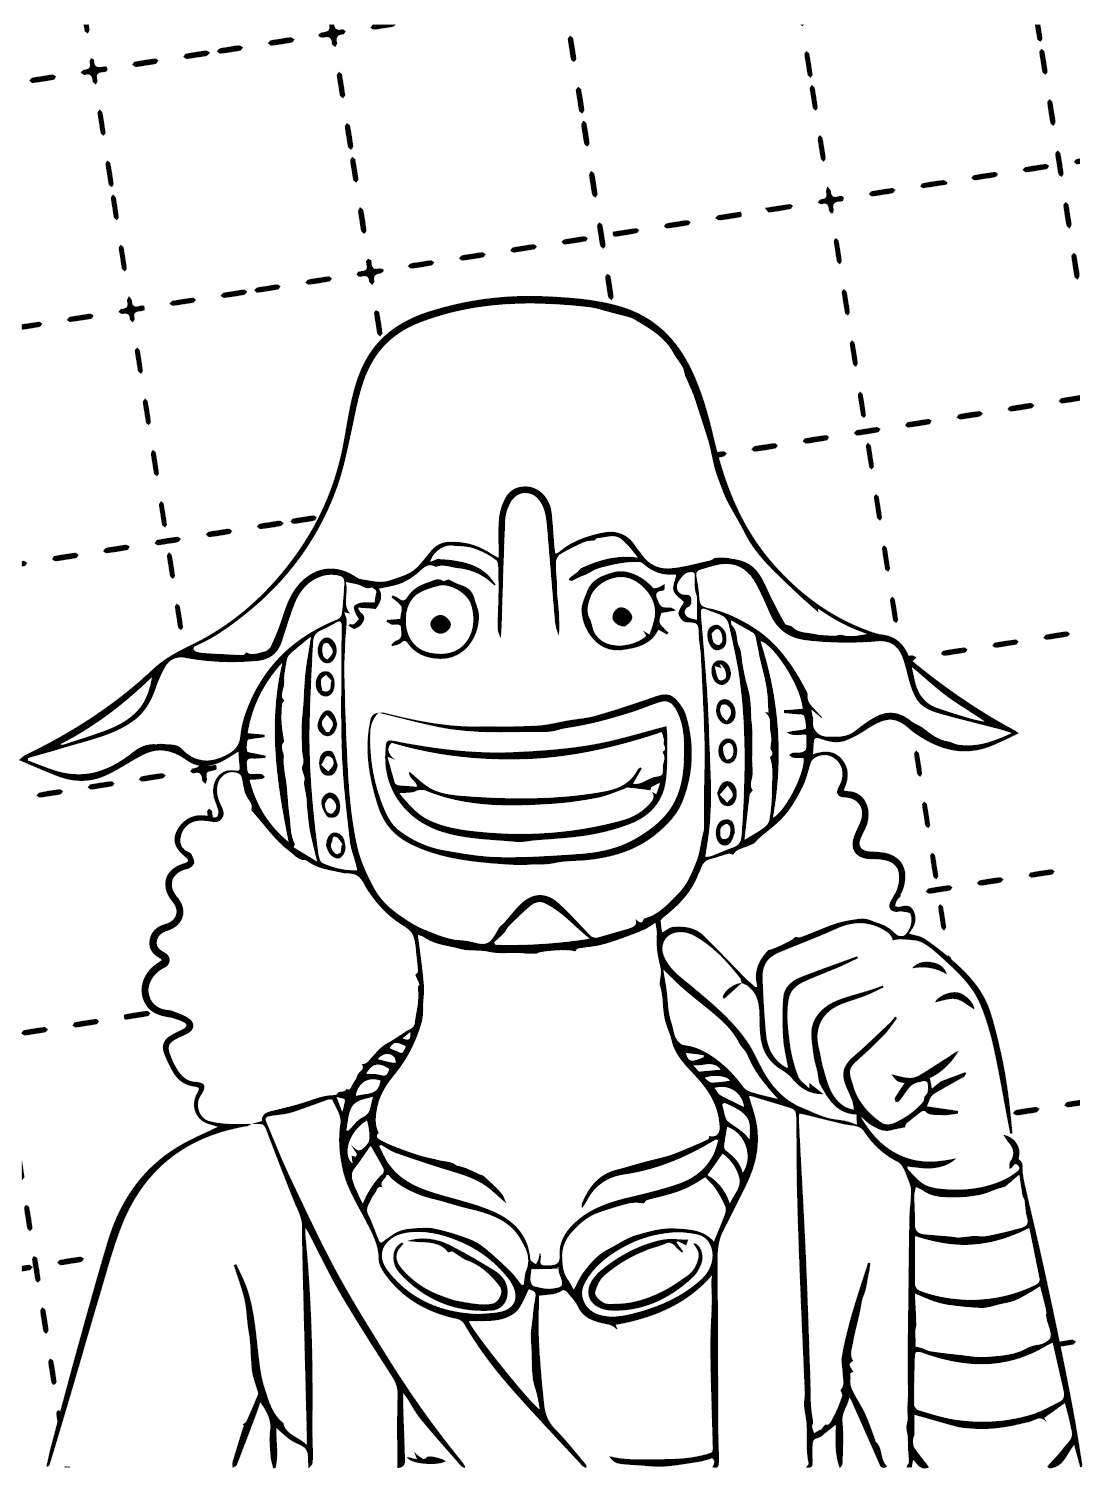 Usopp from One Piece Coloring Page - Free Printable Coloring Pages